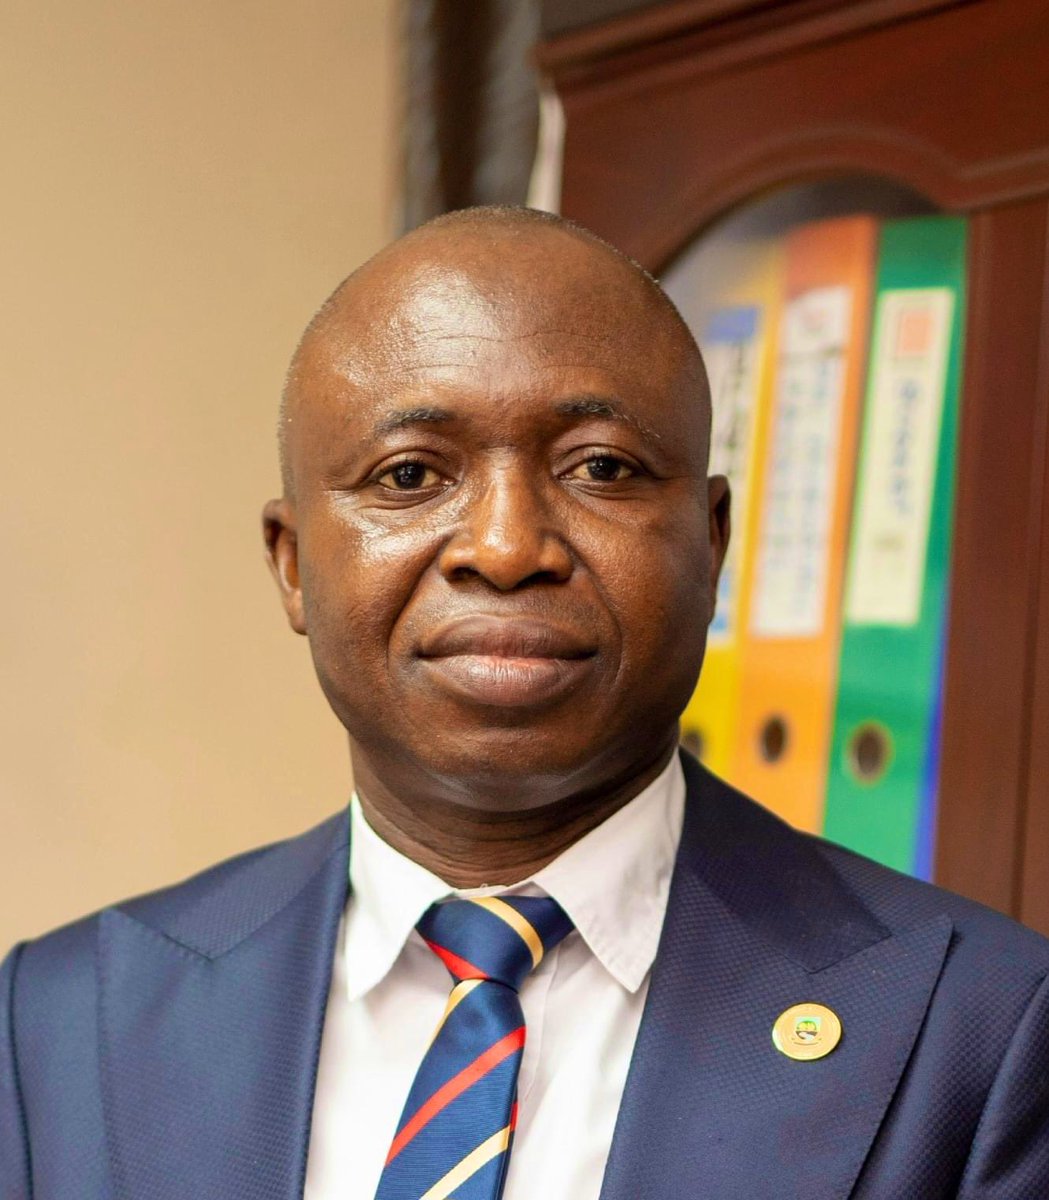 #UPDATE‼️ Prof. Elvis Asare-Bediako (@UENRVC) has been reappointed Vice-Chancellor of UENR for a second four-year term, effective November 1, 2024. We wish him continued success and wisdom in steering UENR towards an even brighter future. #AskUenr